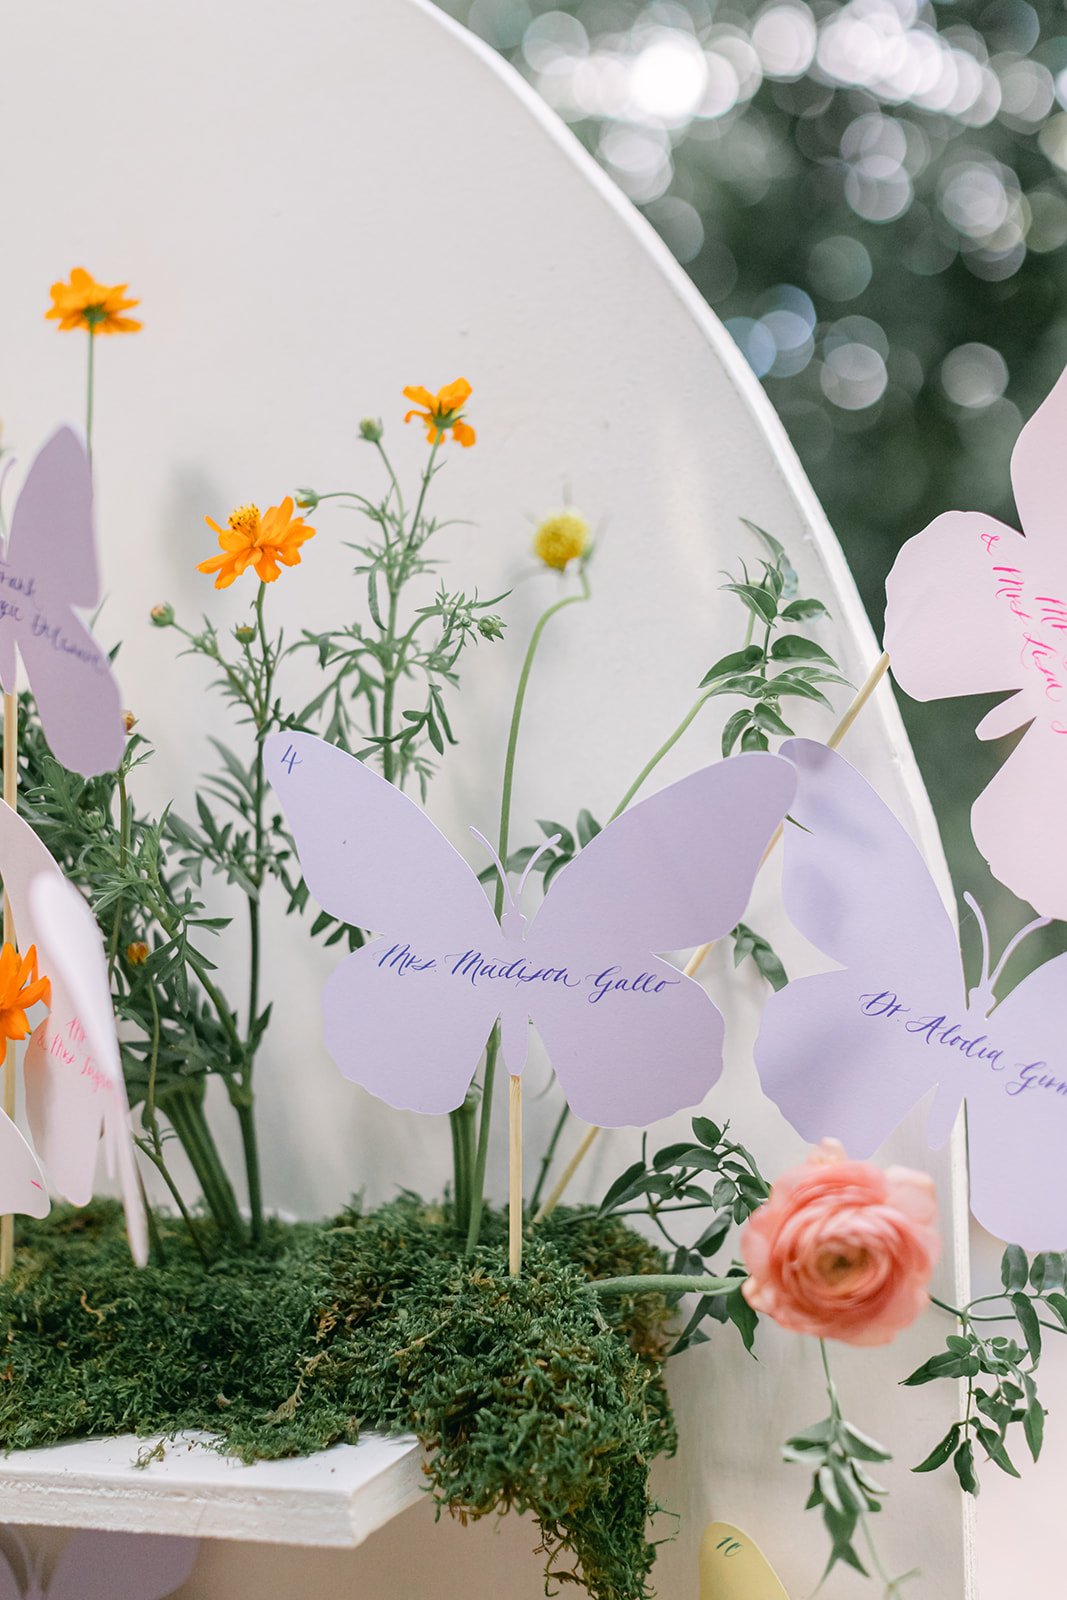 romantic wedding place cards with calligraphy in los angeles.jpg